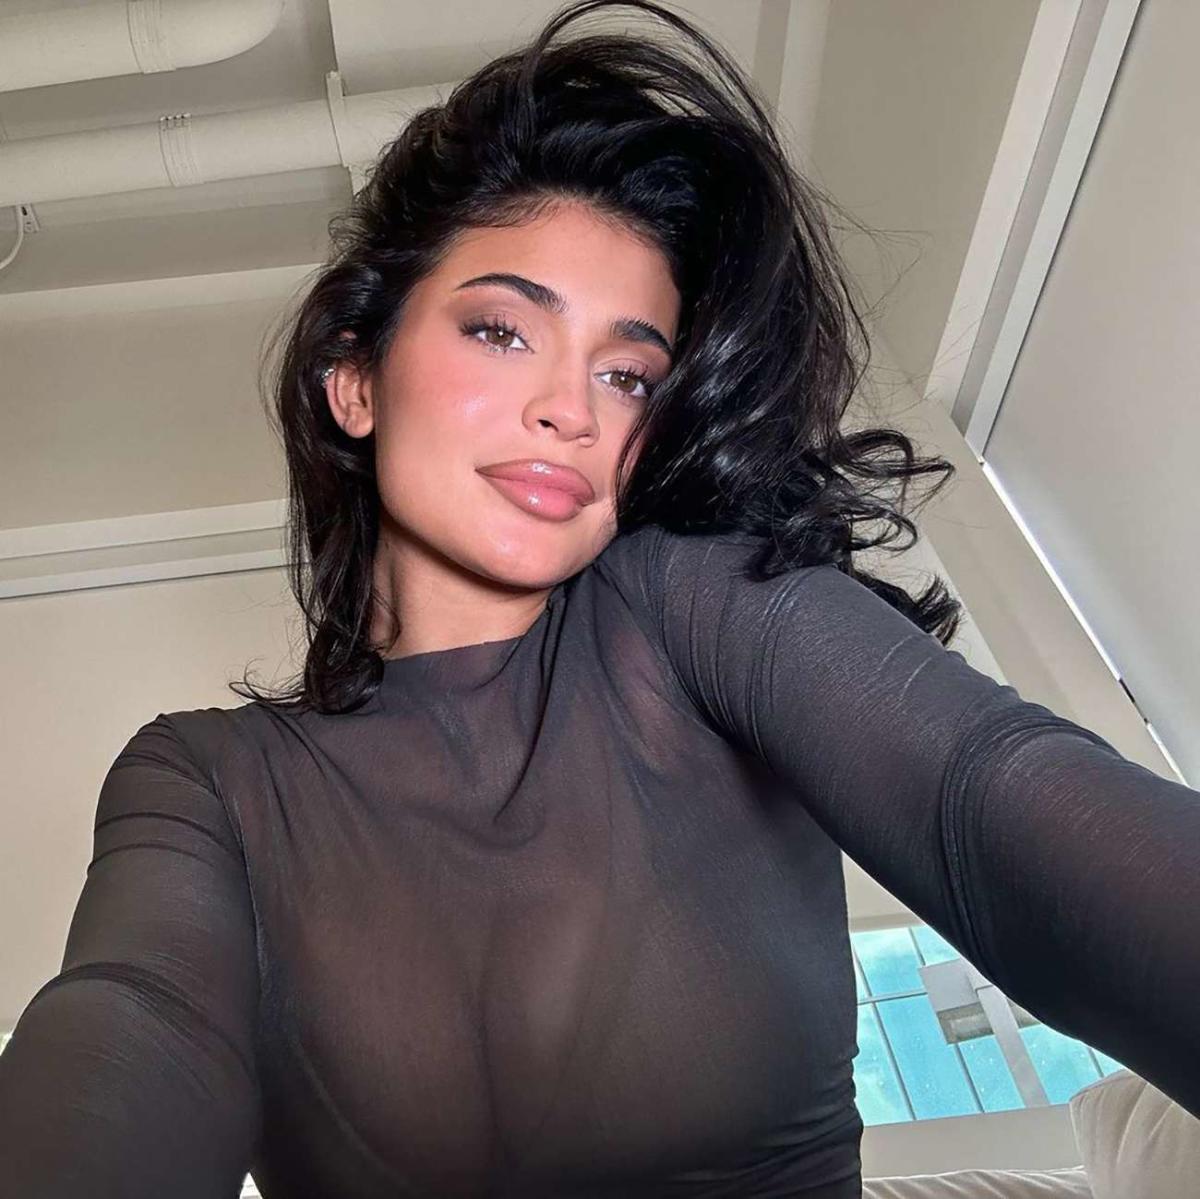 Mesh Dresses: Celebs In Sheer Outfits – Kylie Jenner & More